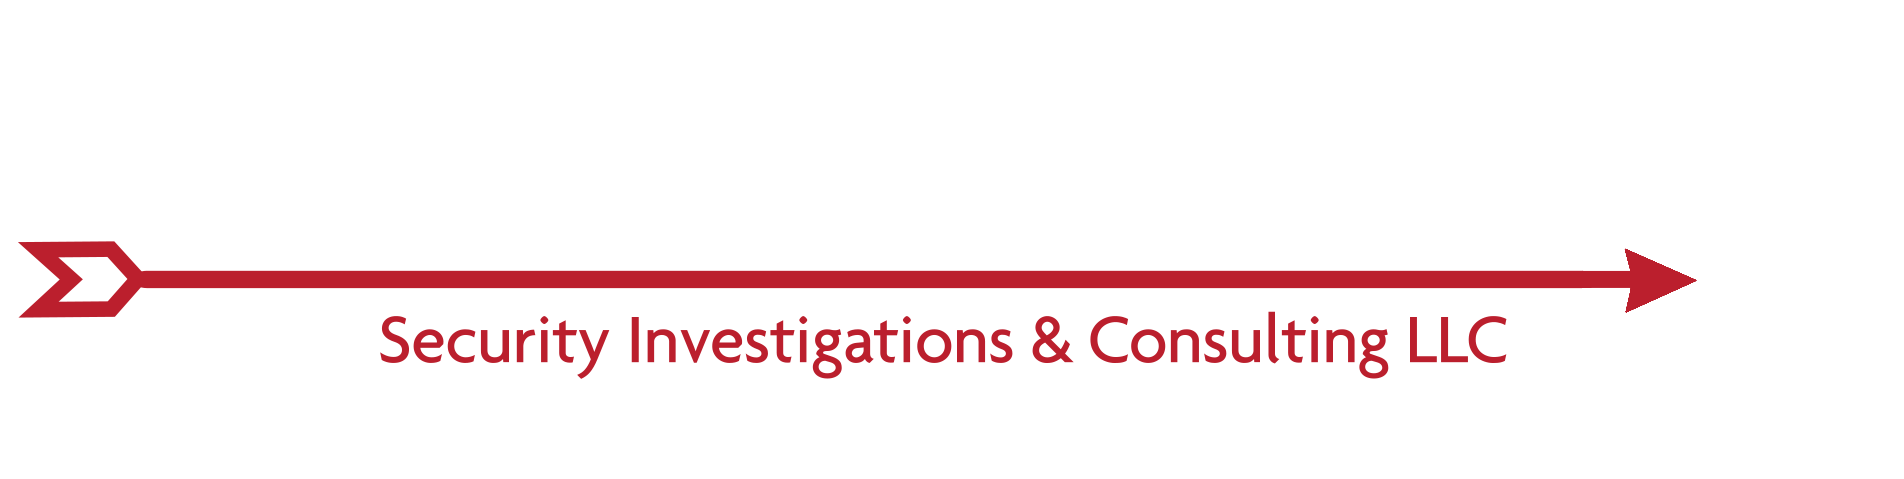 On Point Security Investigations & Consulting